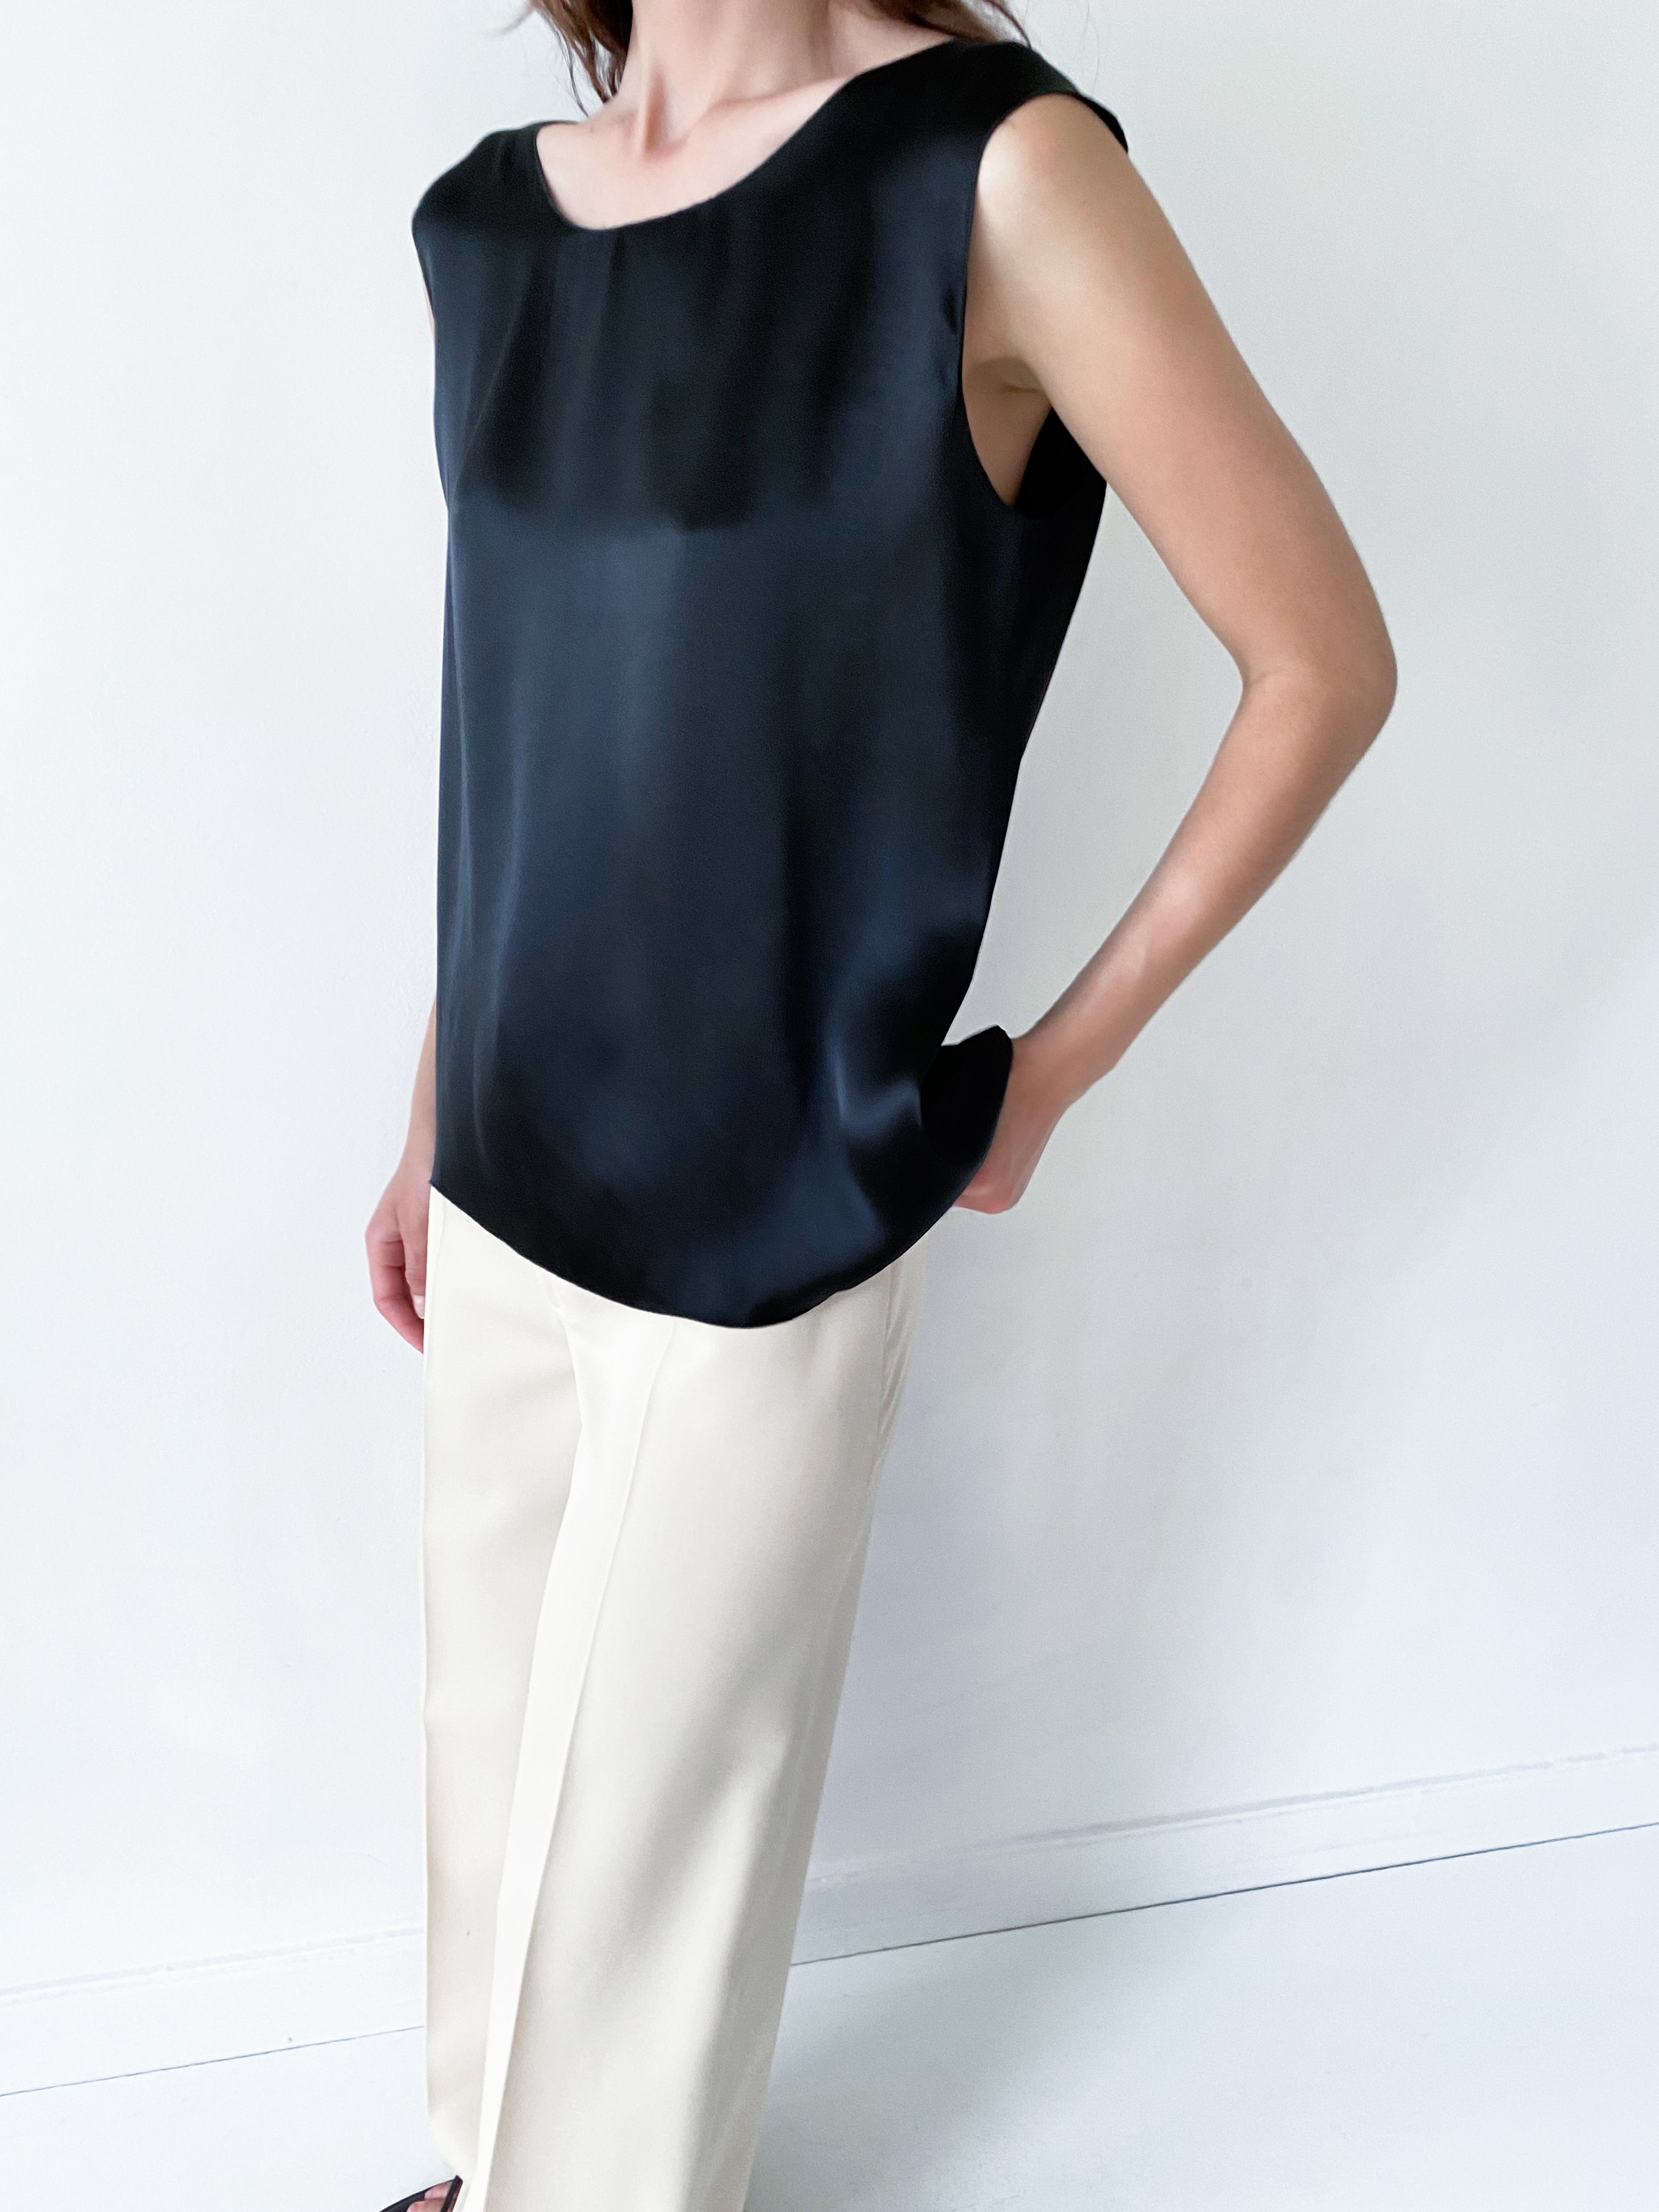 Silk tank top made in France